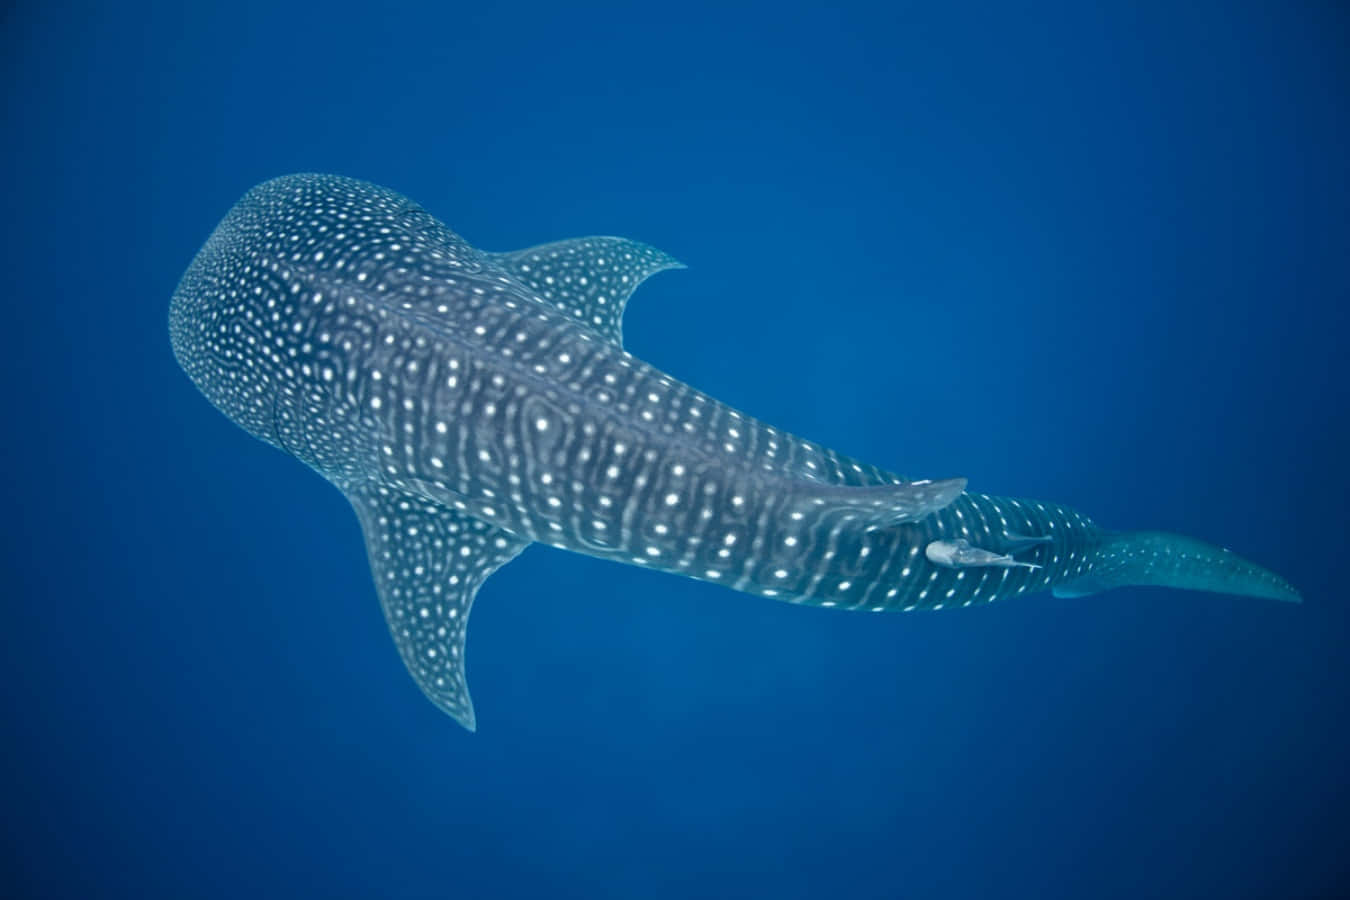 A Beautiful Whale Shark Swimming in the Oceans